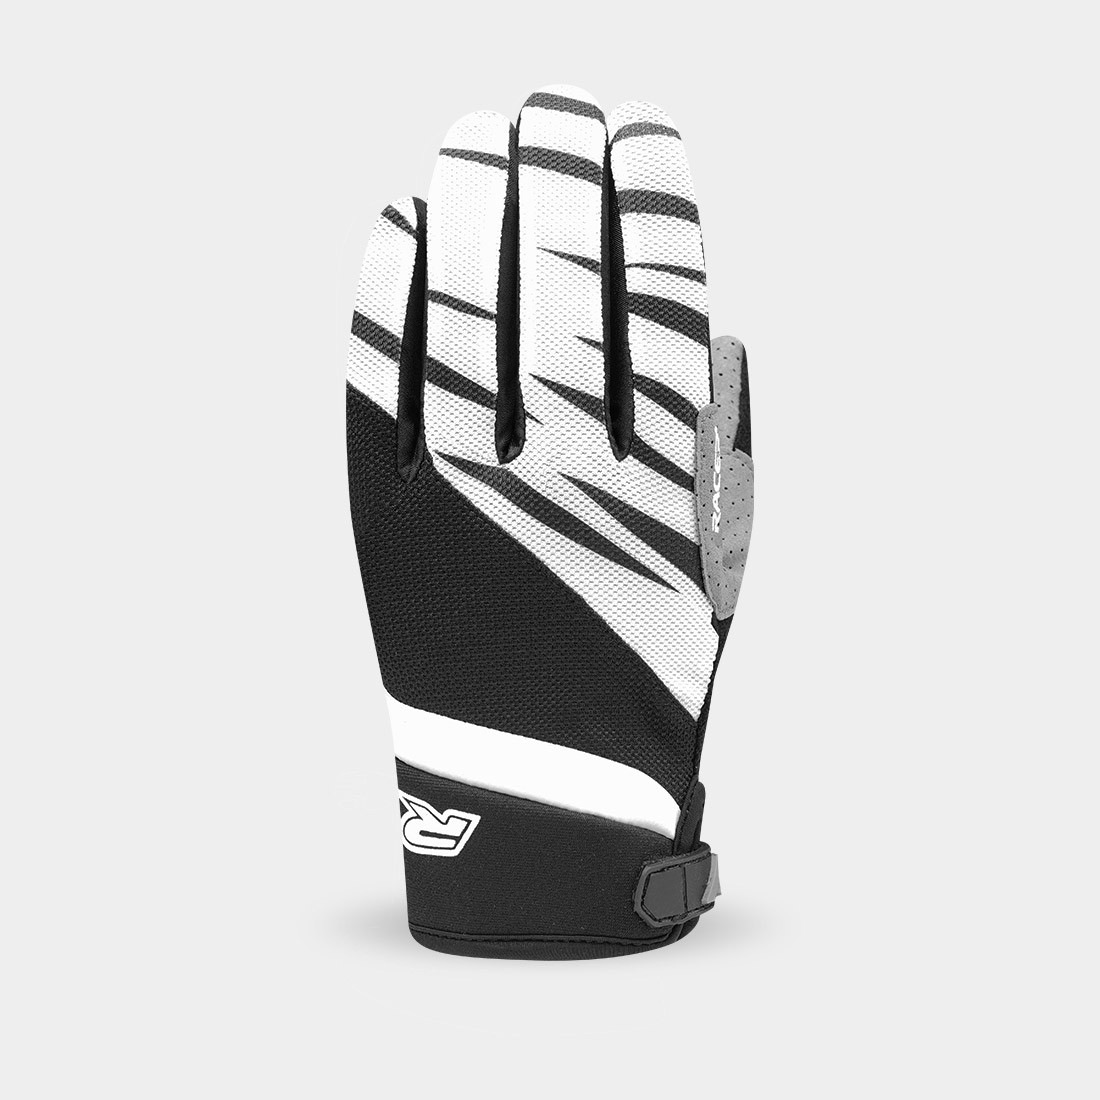 GP STYLE - CYCLING GLOVES